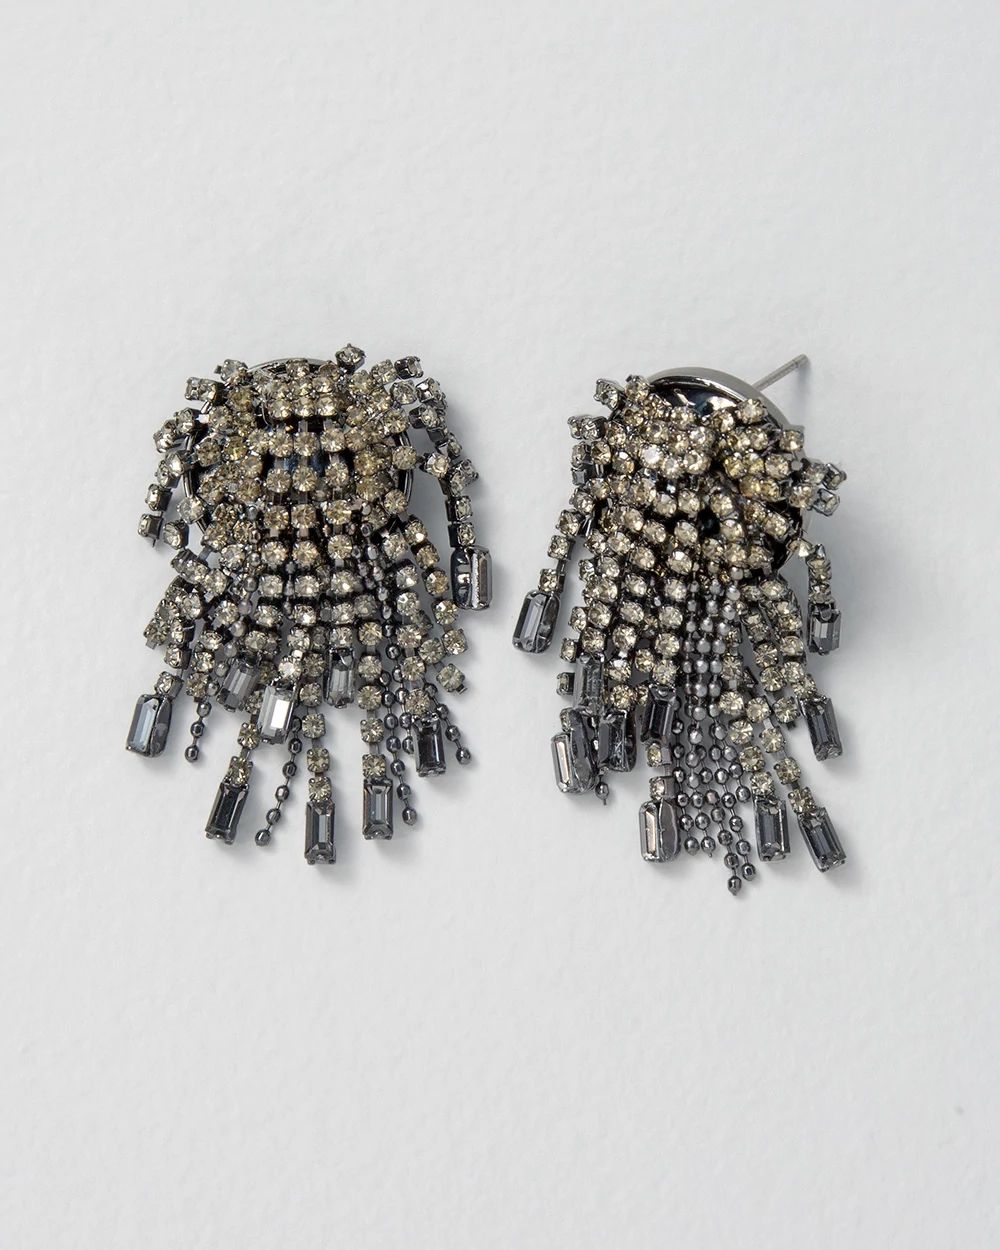 Hematite Fringe Stud Earrings click to view larger image.